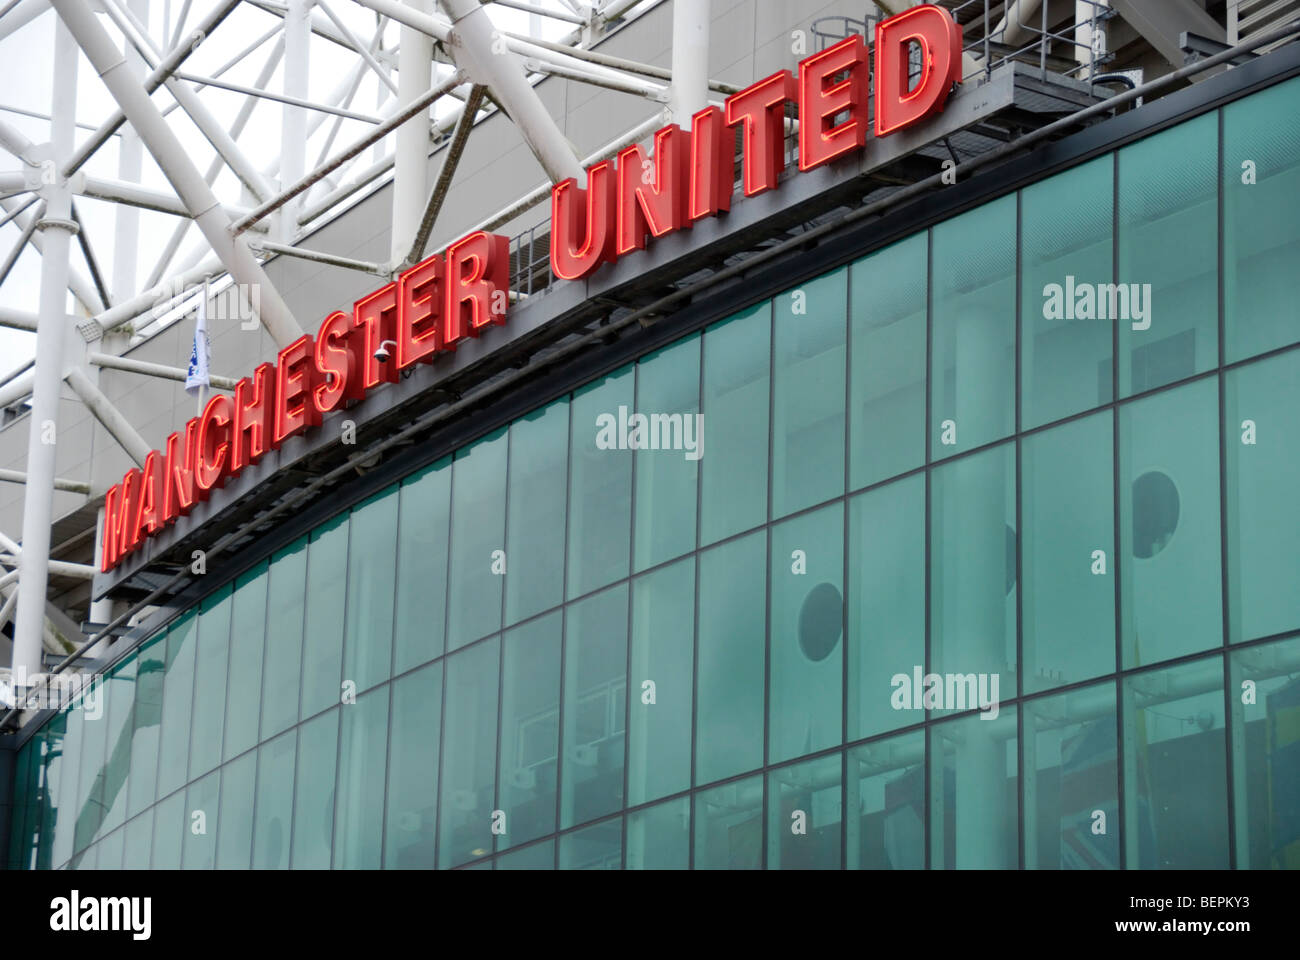 Manchester United le stade de football Old Trafford, Manchester, Angleterre, RU Banque D'Images